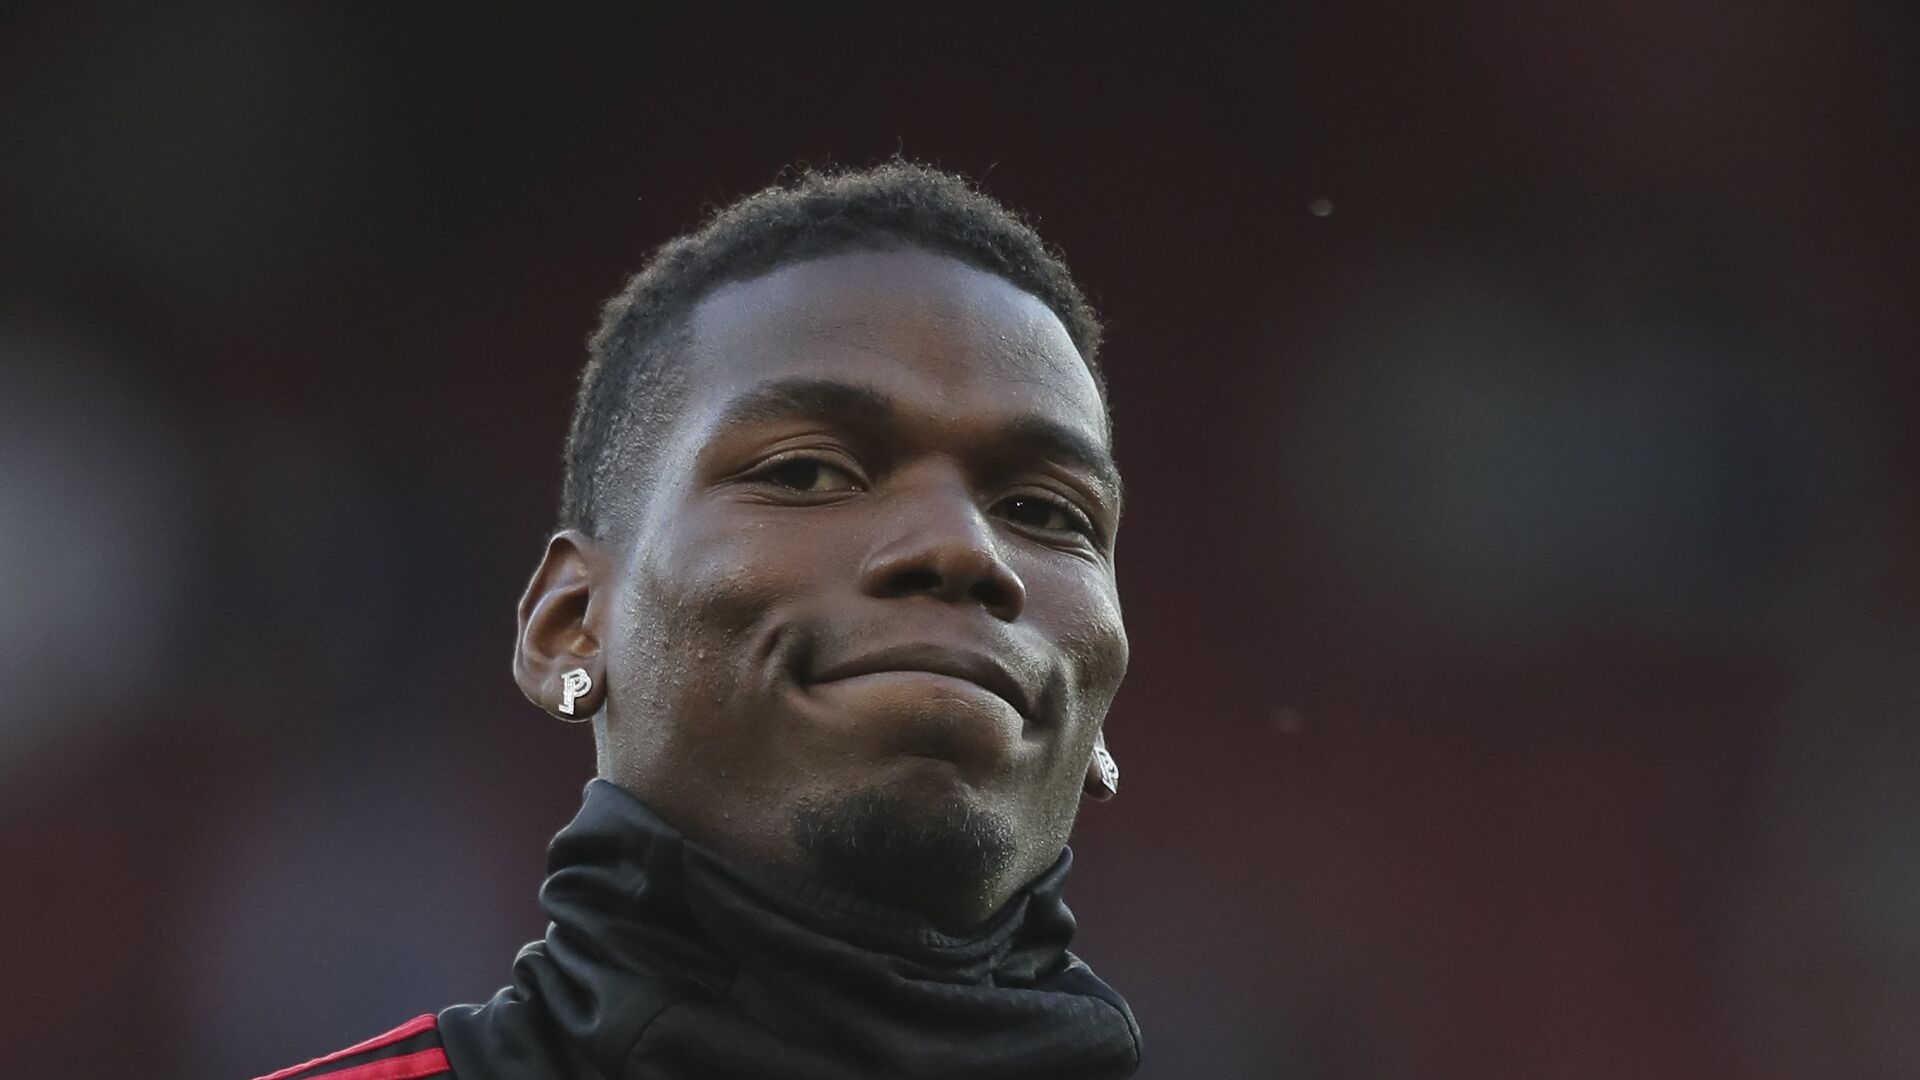 Manchester United's Paul Pogba applauds the fans as he takes part in the warm up prior to the start of the English Premier League soccer match between Manchester United and Leicester City at Old Trafford, in Manchester, England, Friday, Aug. 10, 2018 - اسپوتنیک افغانستان  , 1920, 11.07.2022